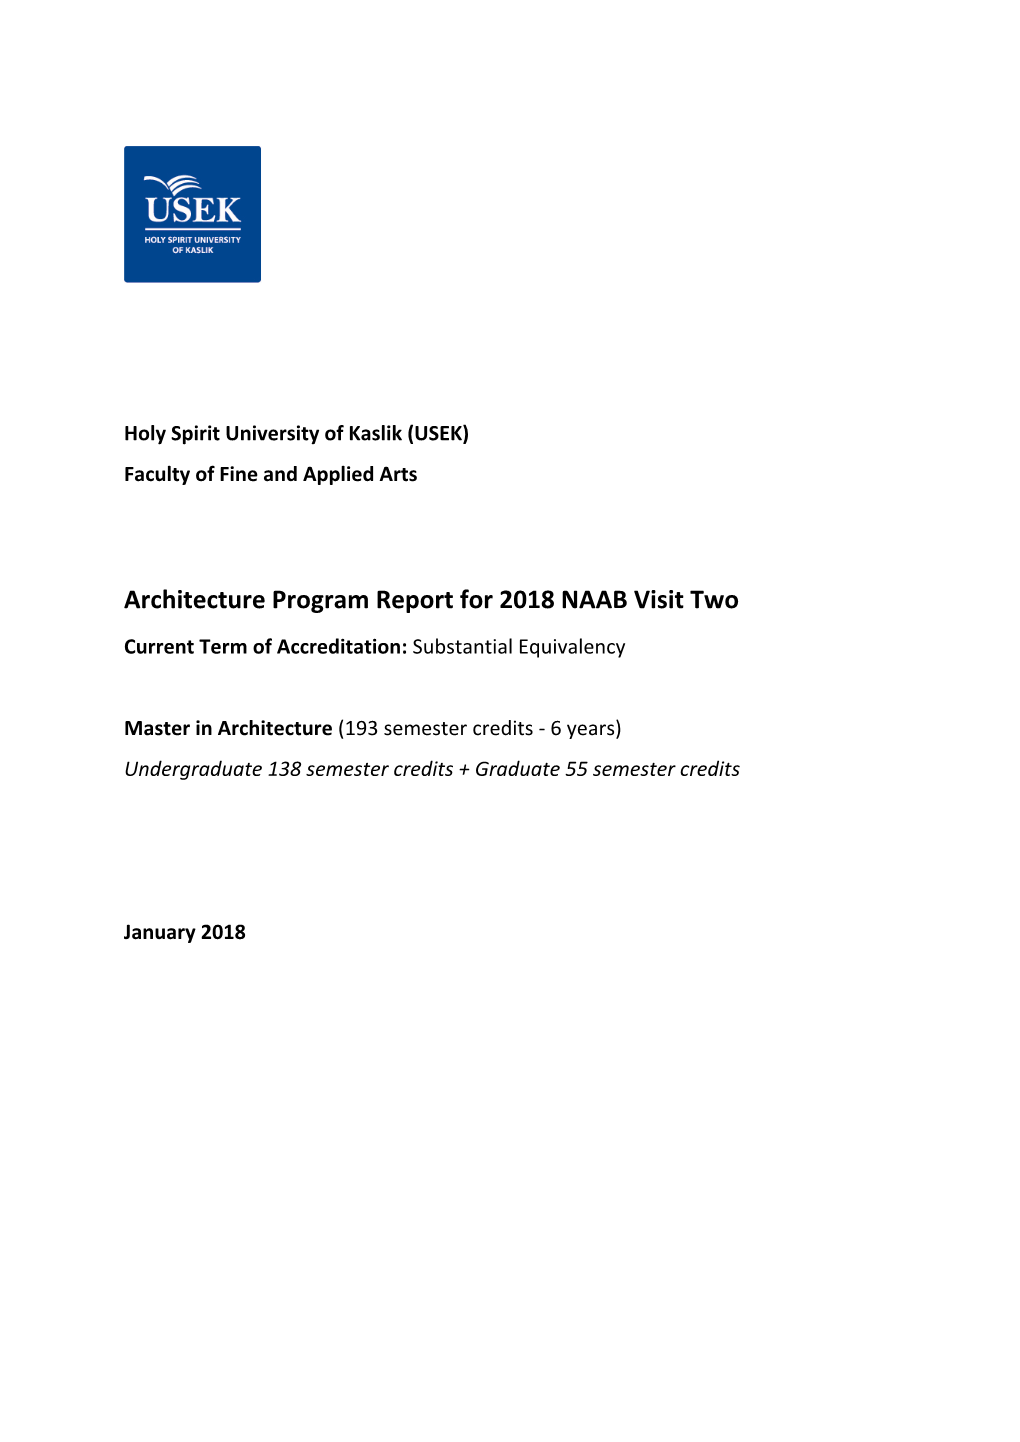 Architecture Program Report for 2018 NAAB Visit Two Current Term of Accreditation: Substantial Equivalency